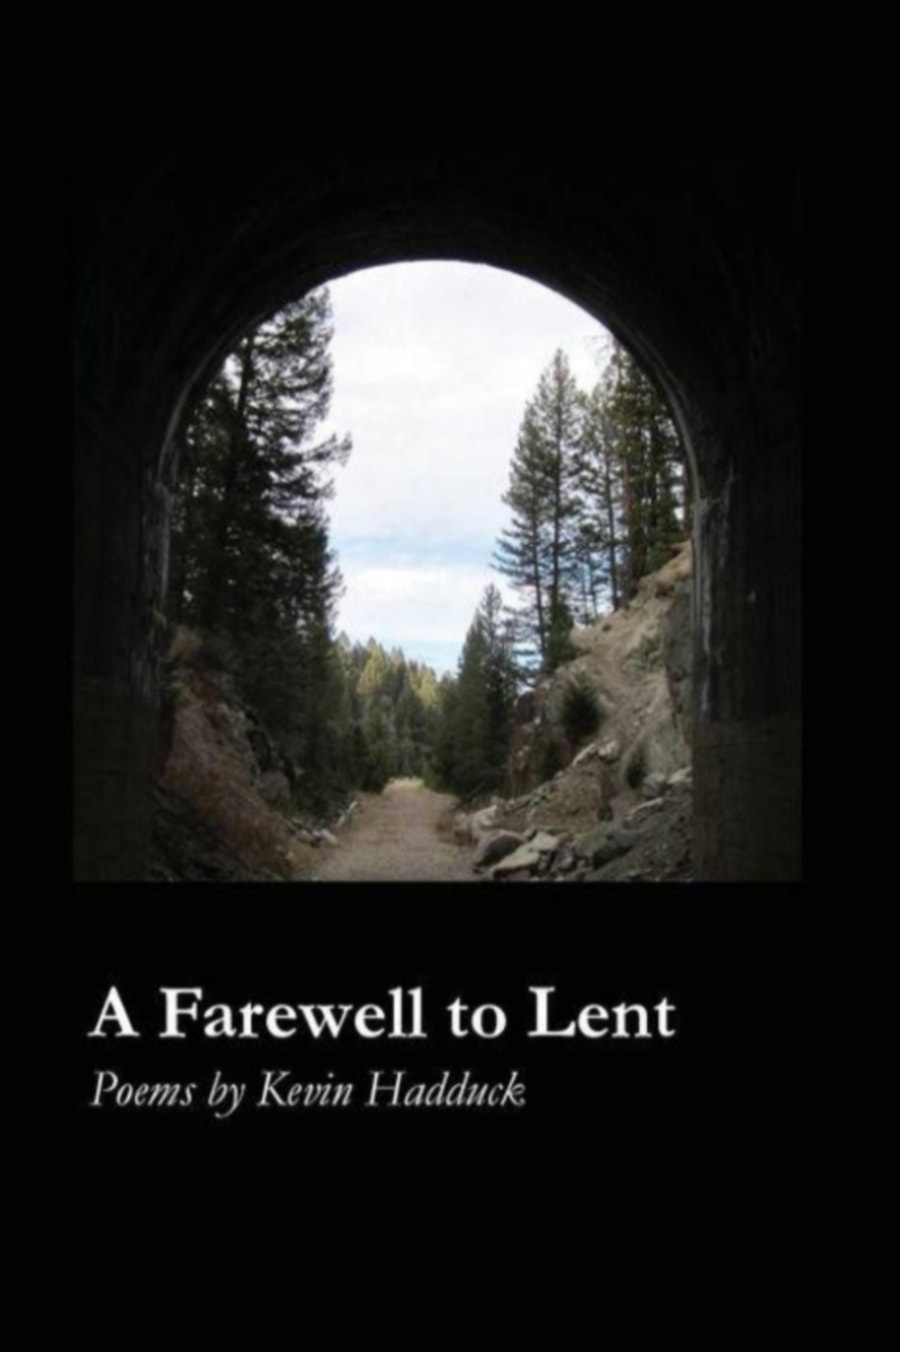 A Farewell to Lent